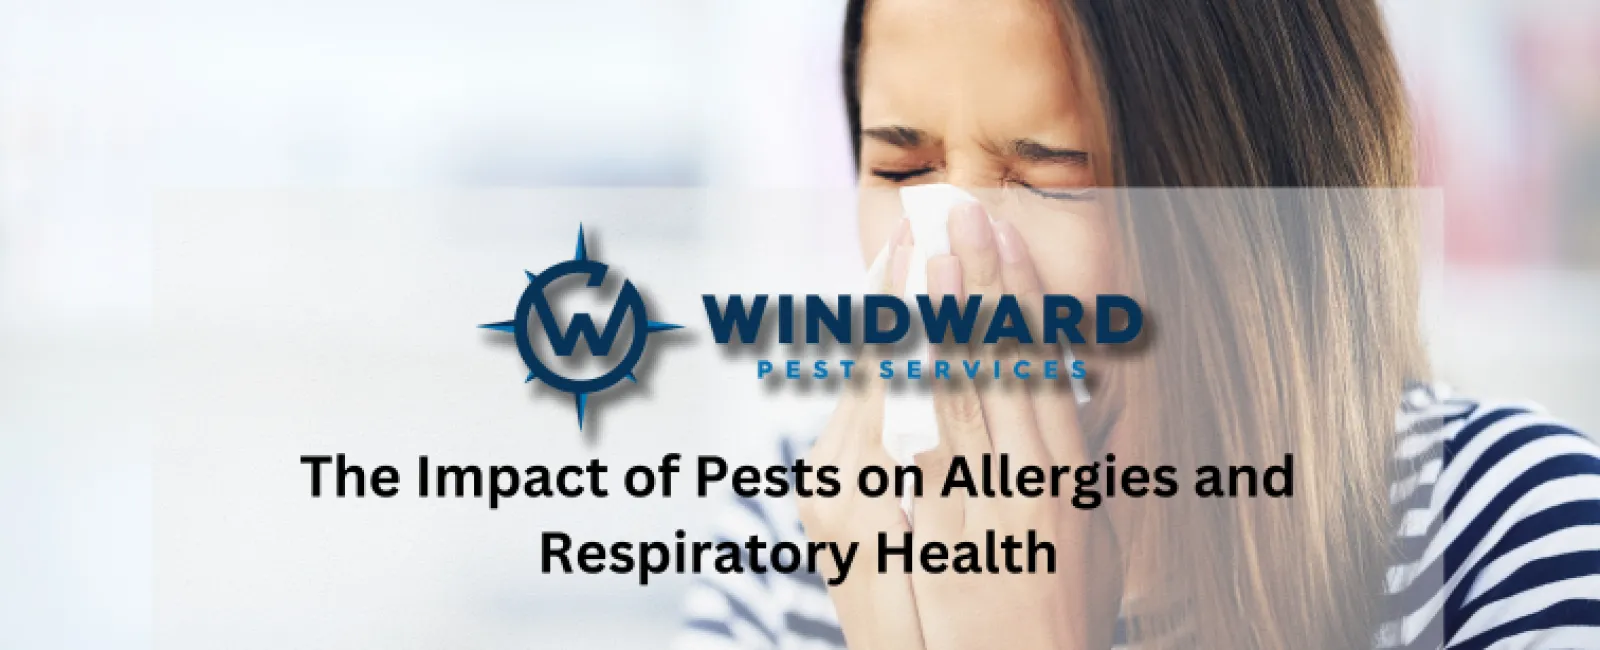 The Impact of Pests on Allergies and Respiratory Health